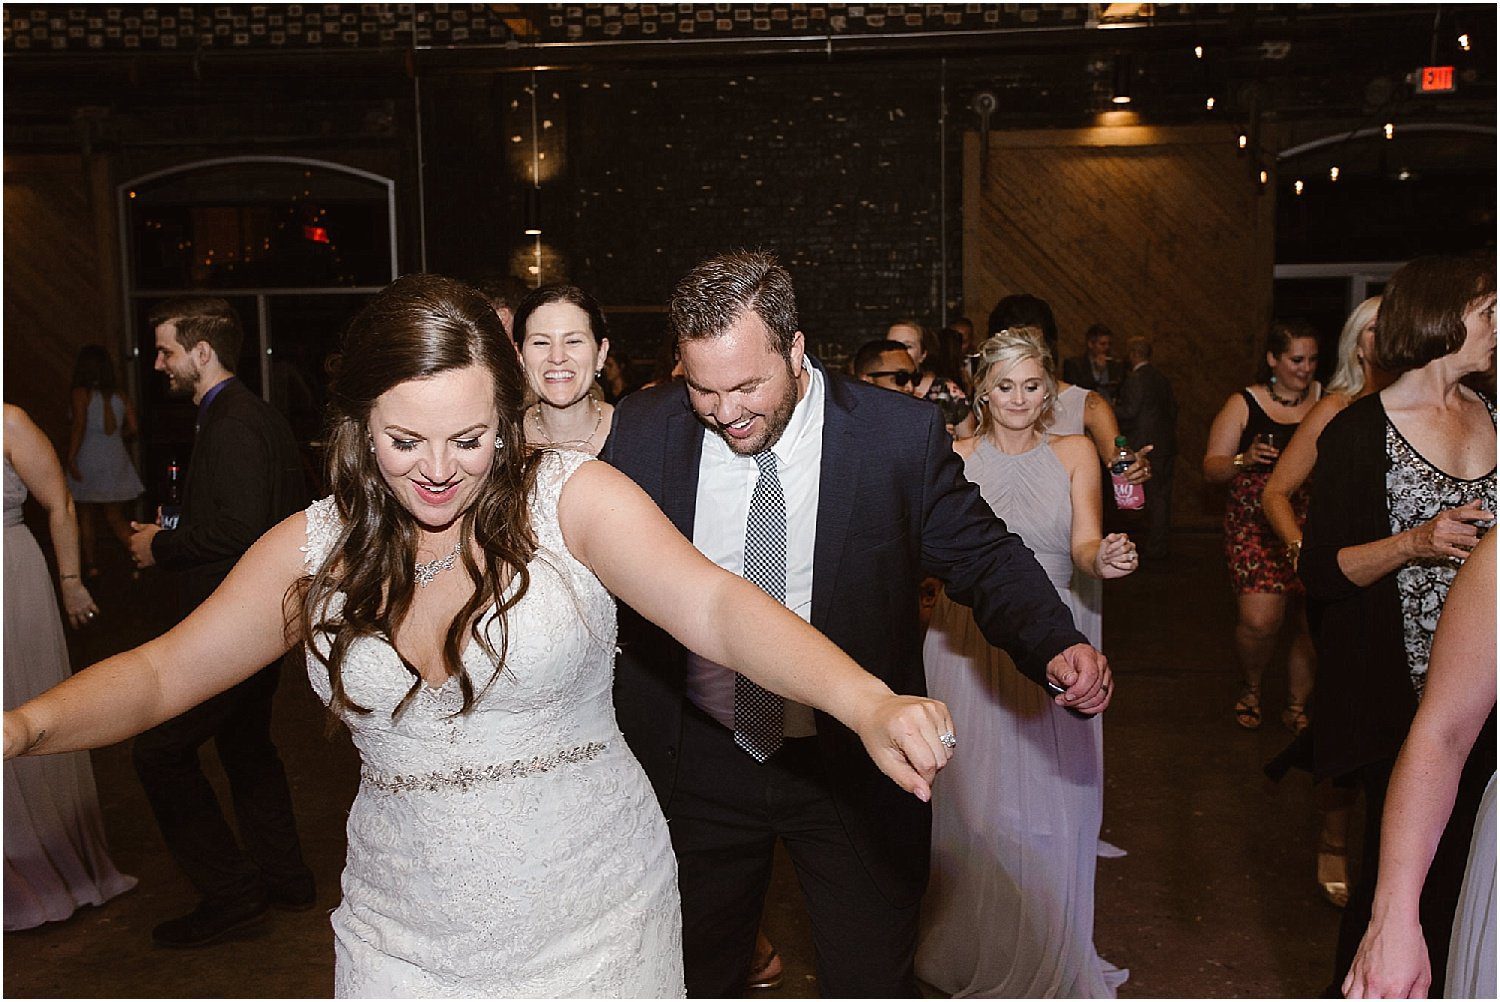 Reception Photos at Wedding in Downtown Knoxville